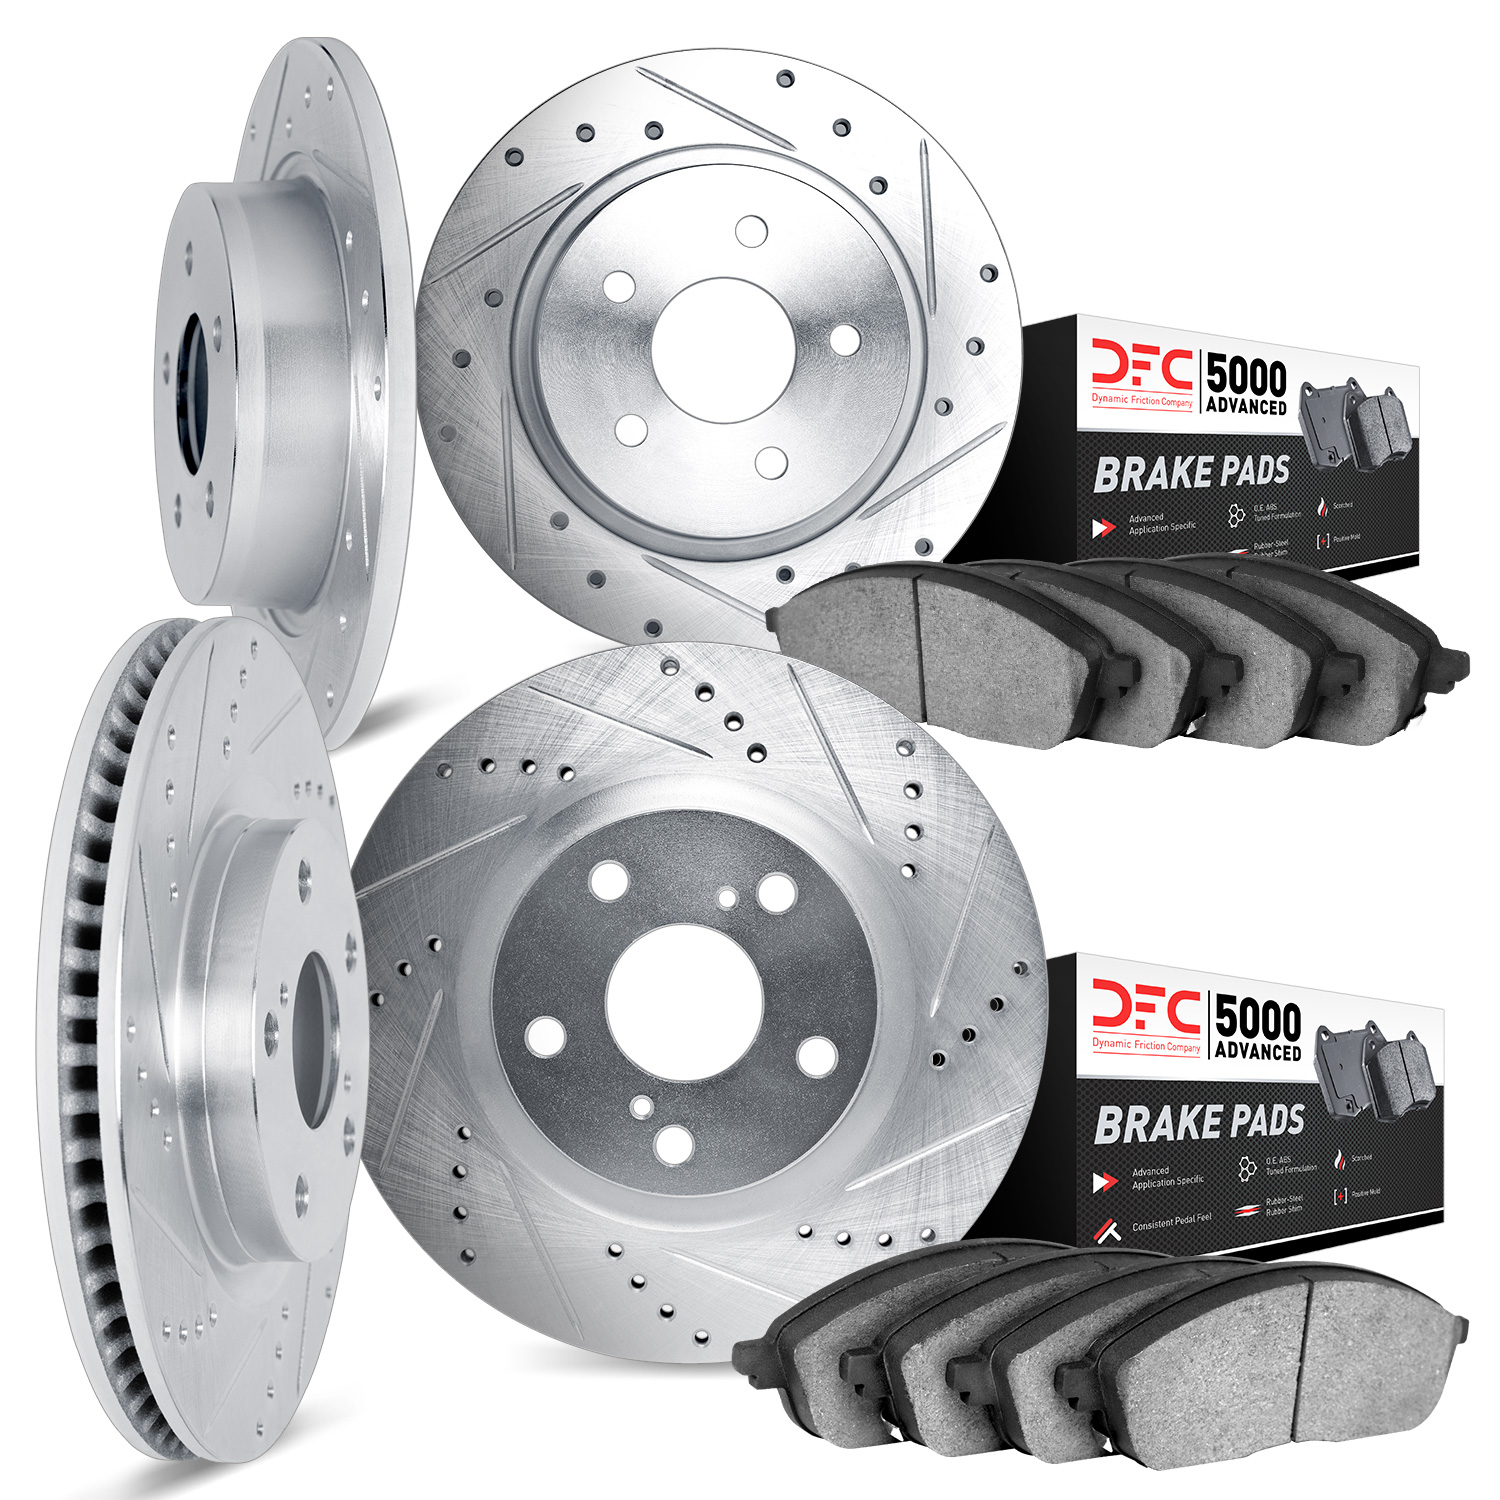 7504-74058 Drilled/Slotted Brake Rotors w/5000 Advanced Brake Pads Kit [Silver], 2008-2015 Audi/Volkswagen, Position: Front and